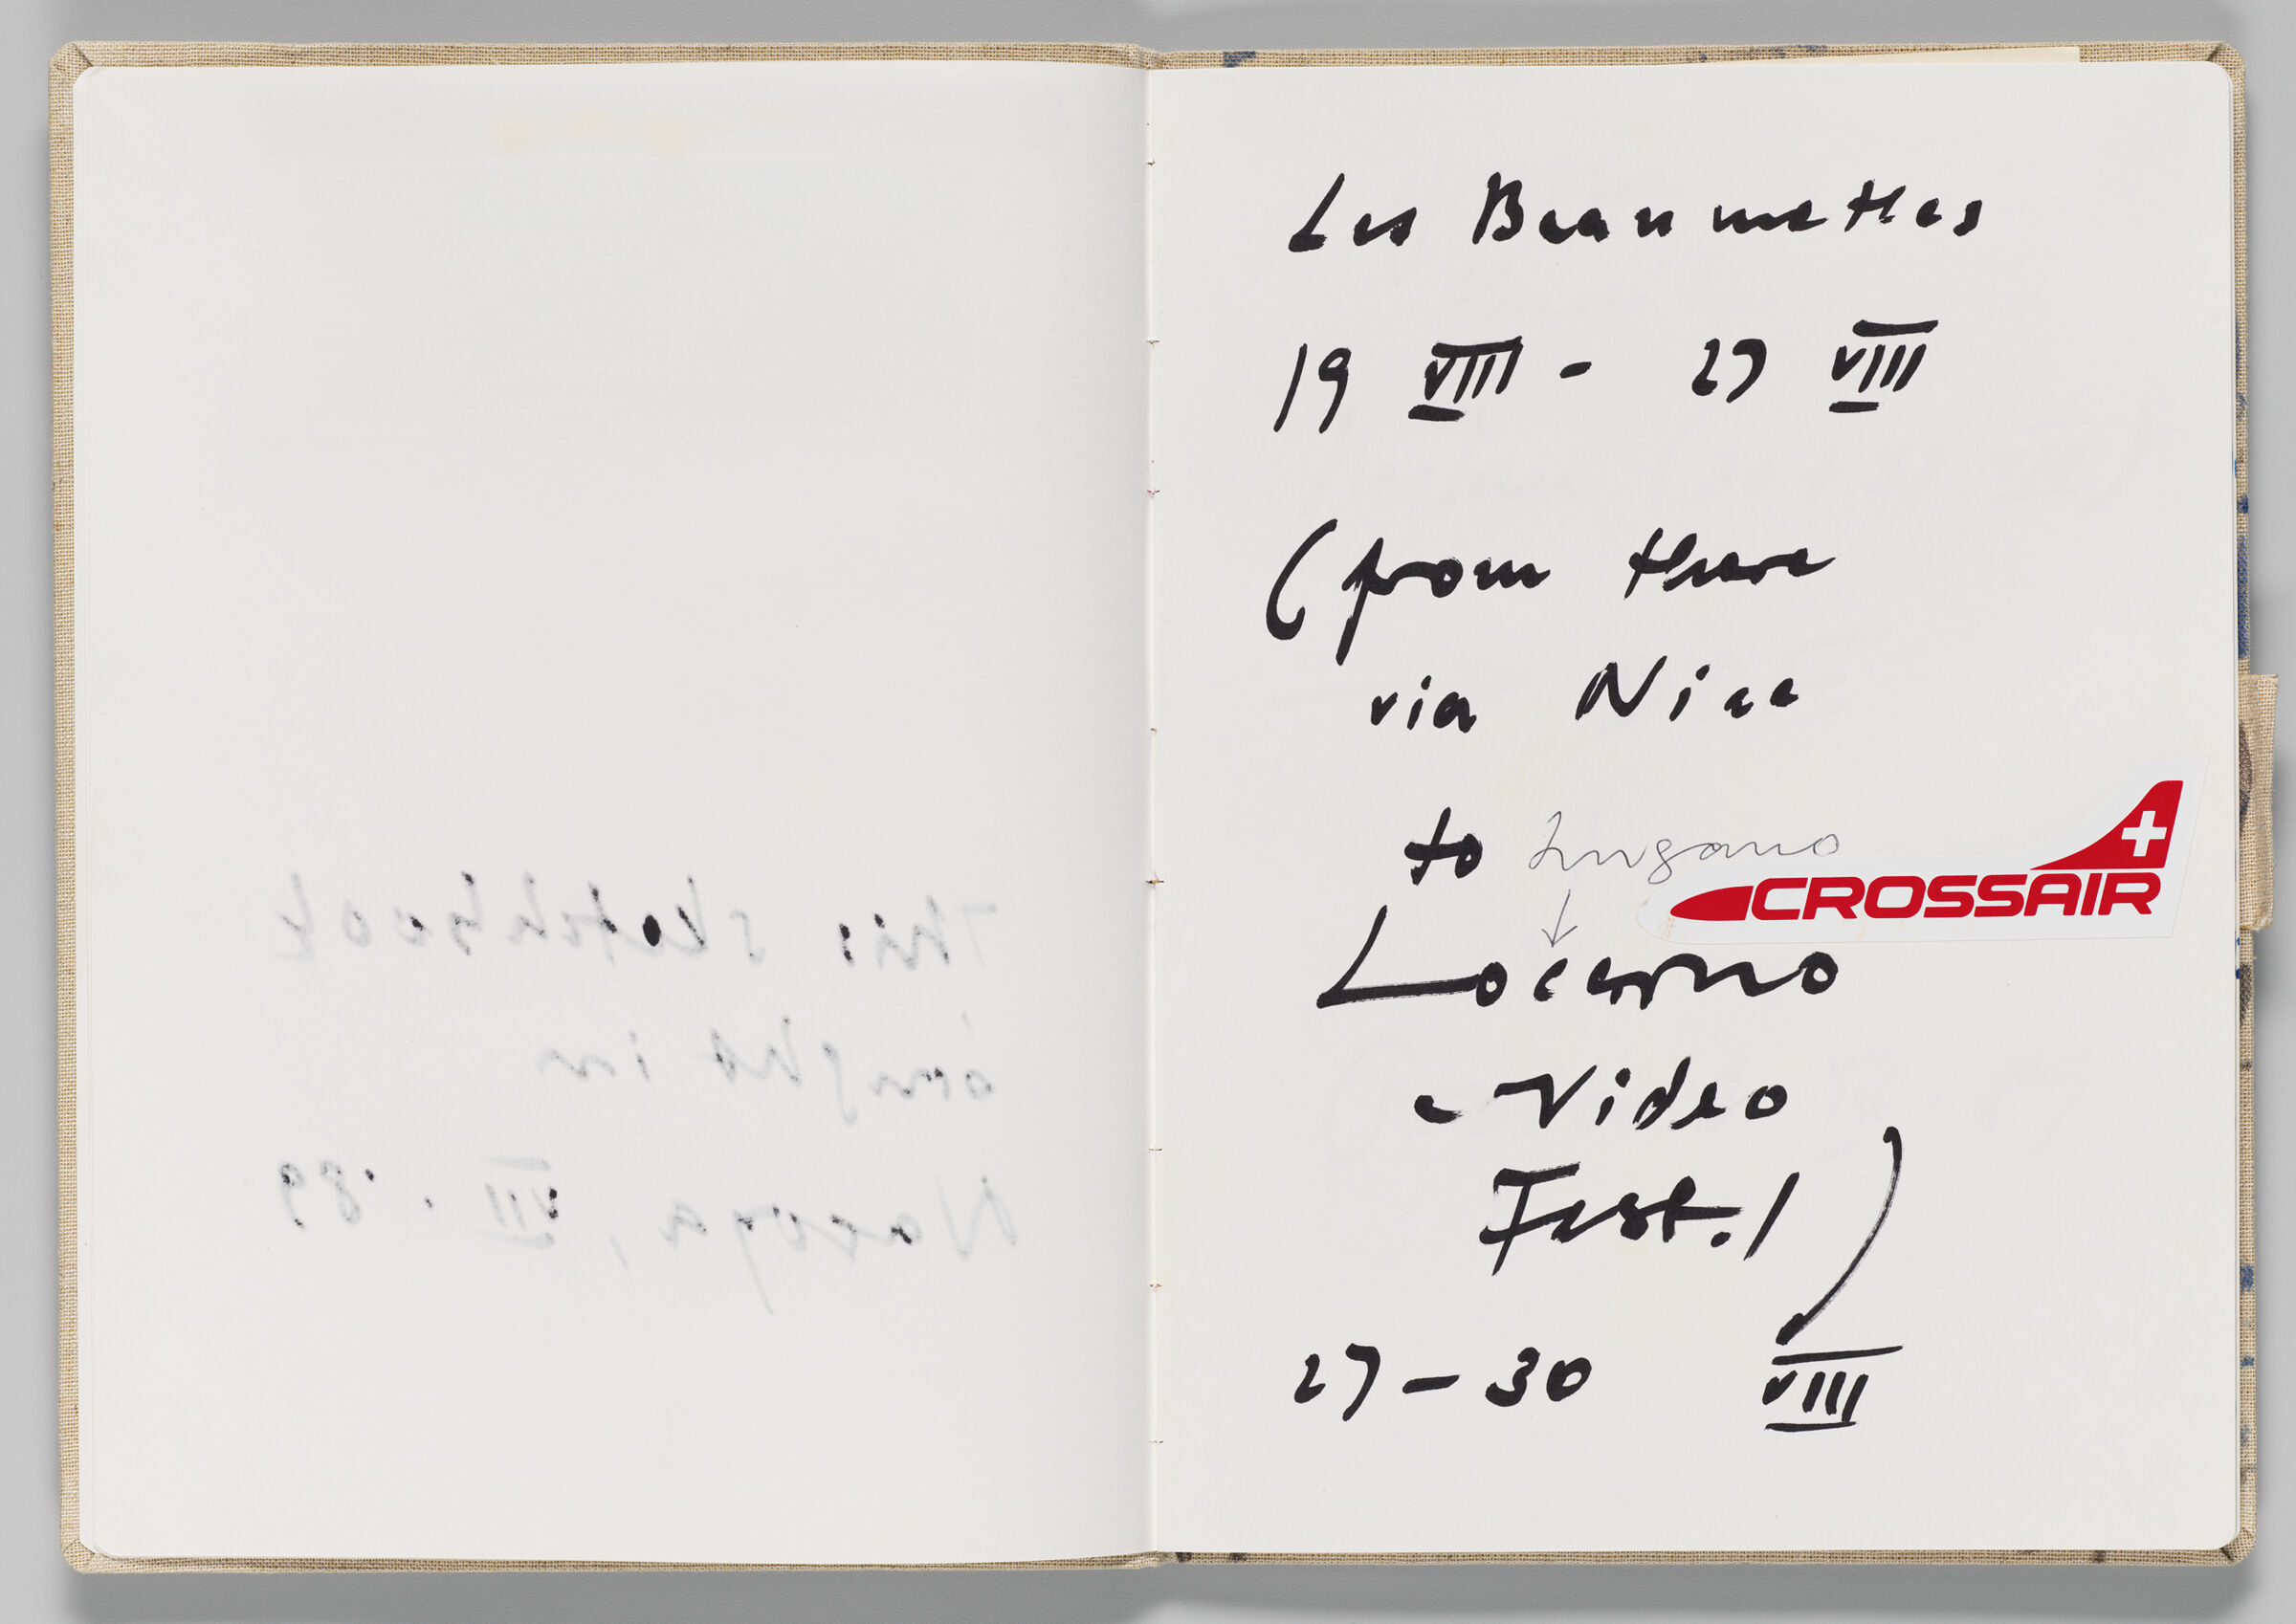 Untitled (Bleed-Through Of Previous Page, Left Page); Untitled (Note On Travel Itinerary And Crossair Sticker, Right Page)